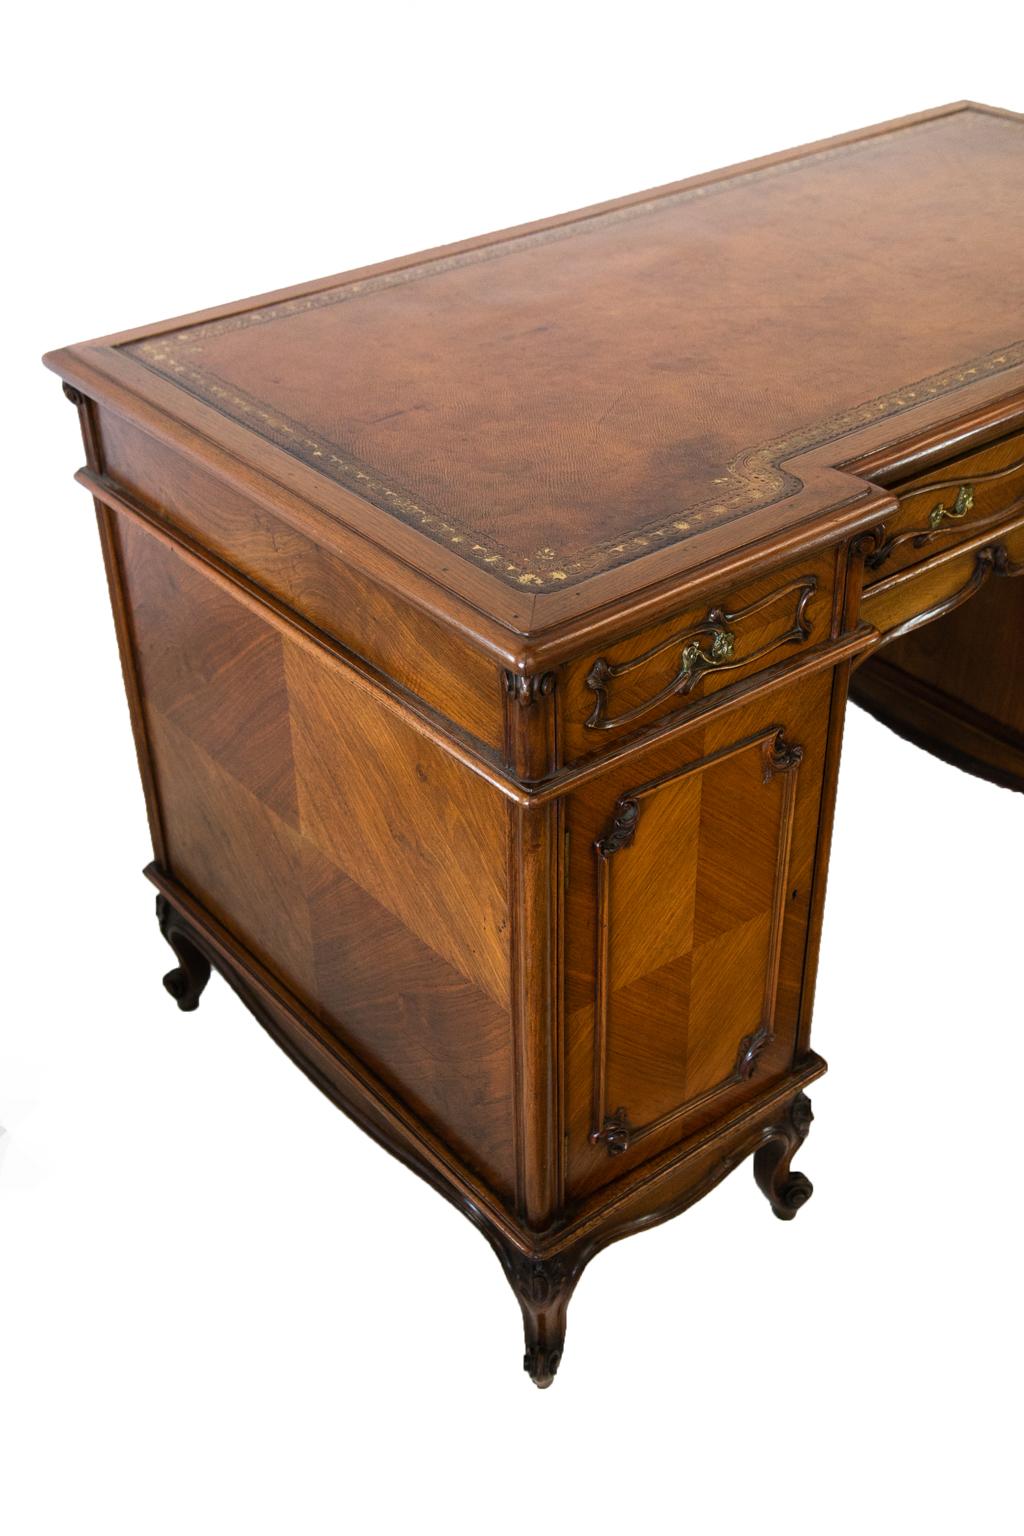 Late 19th Century English Walnut Two Pedestal Desk For Sale